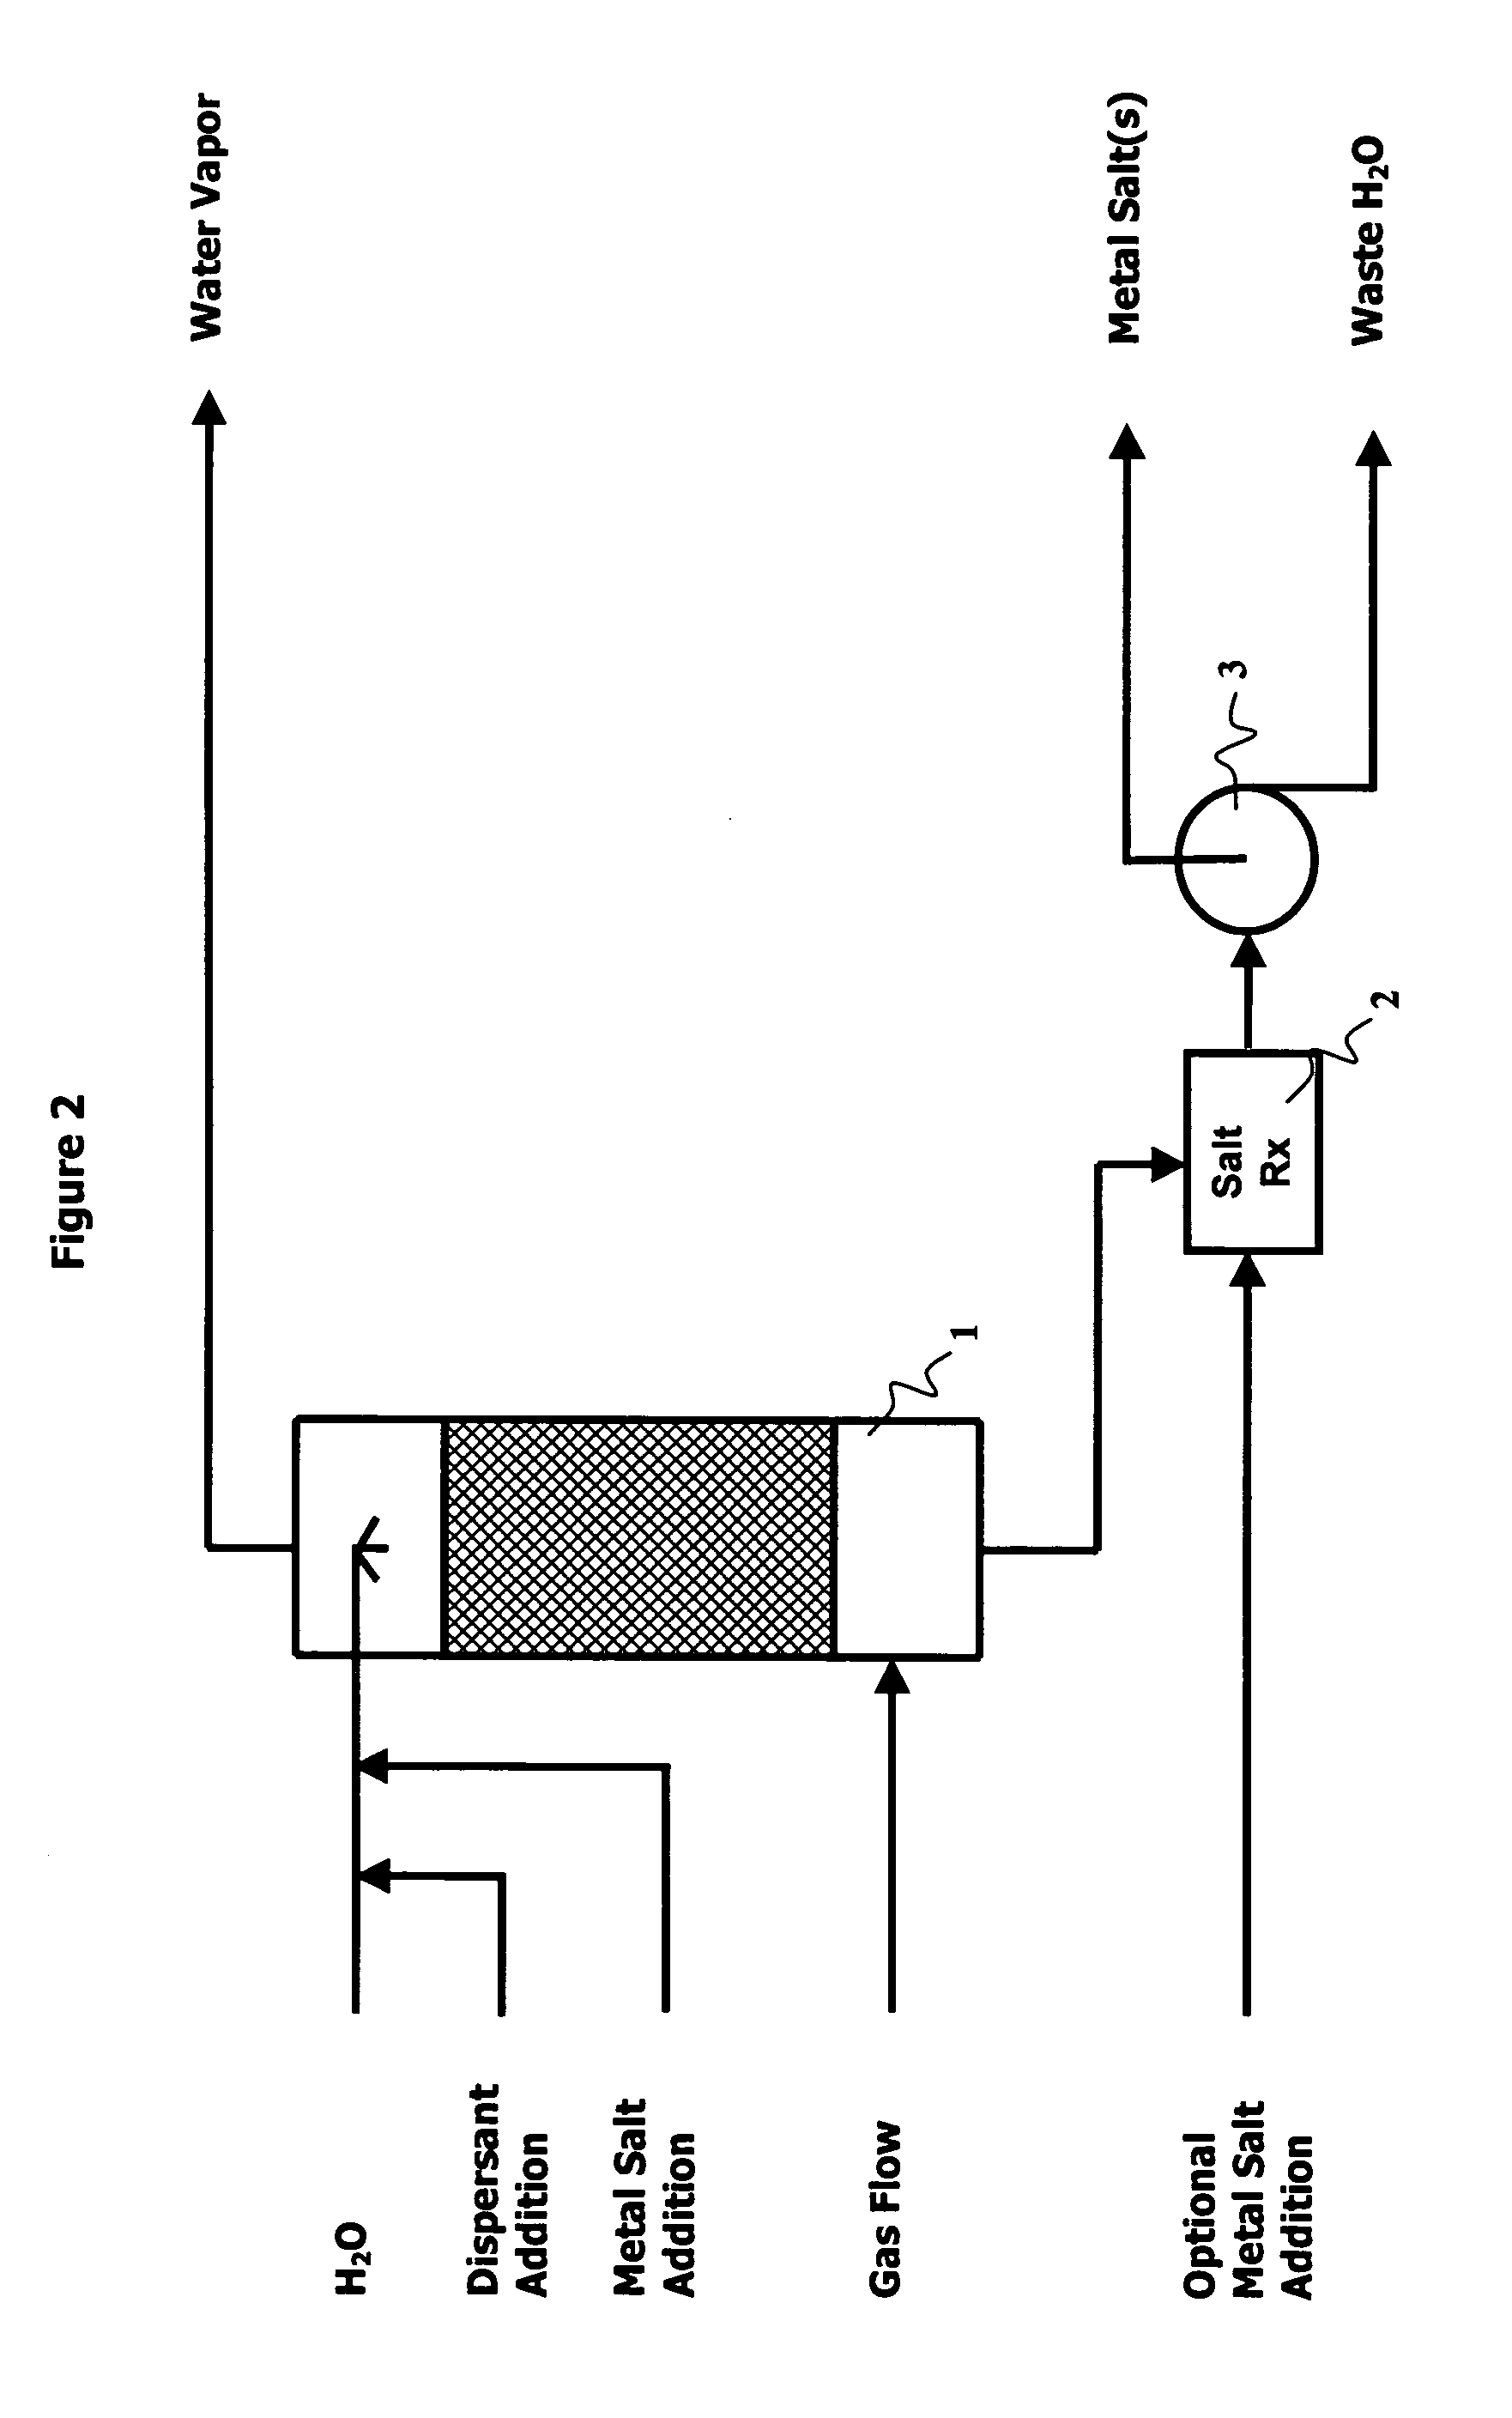 Methods, processes and apparatus of sequestering and environmentally coverting oxide(s) of carbon and nitrogen